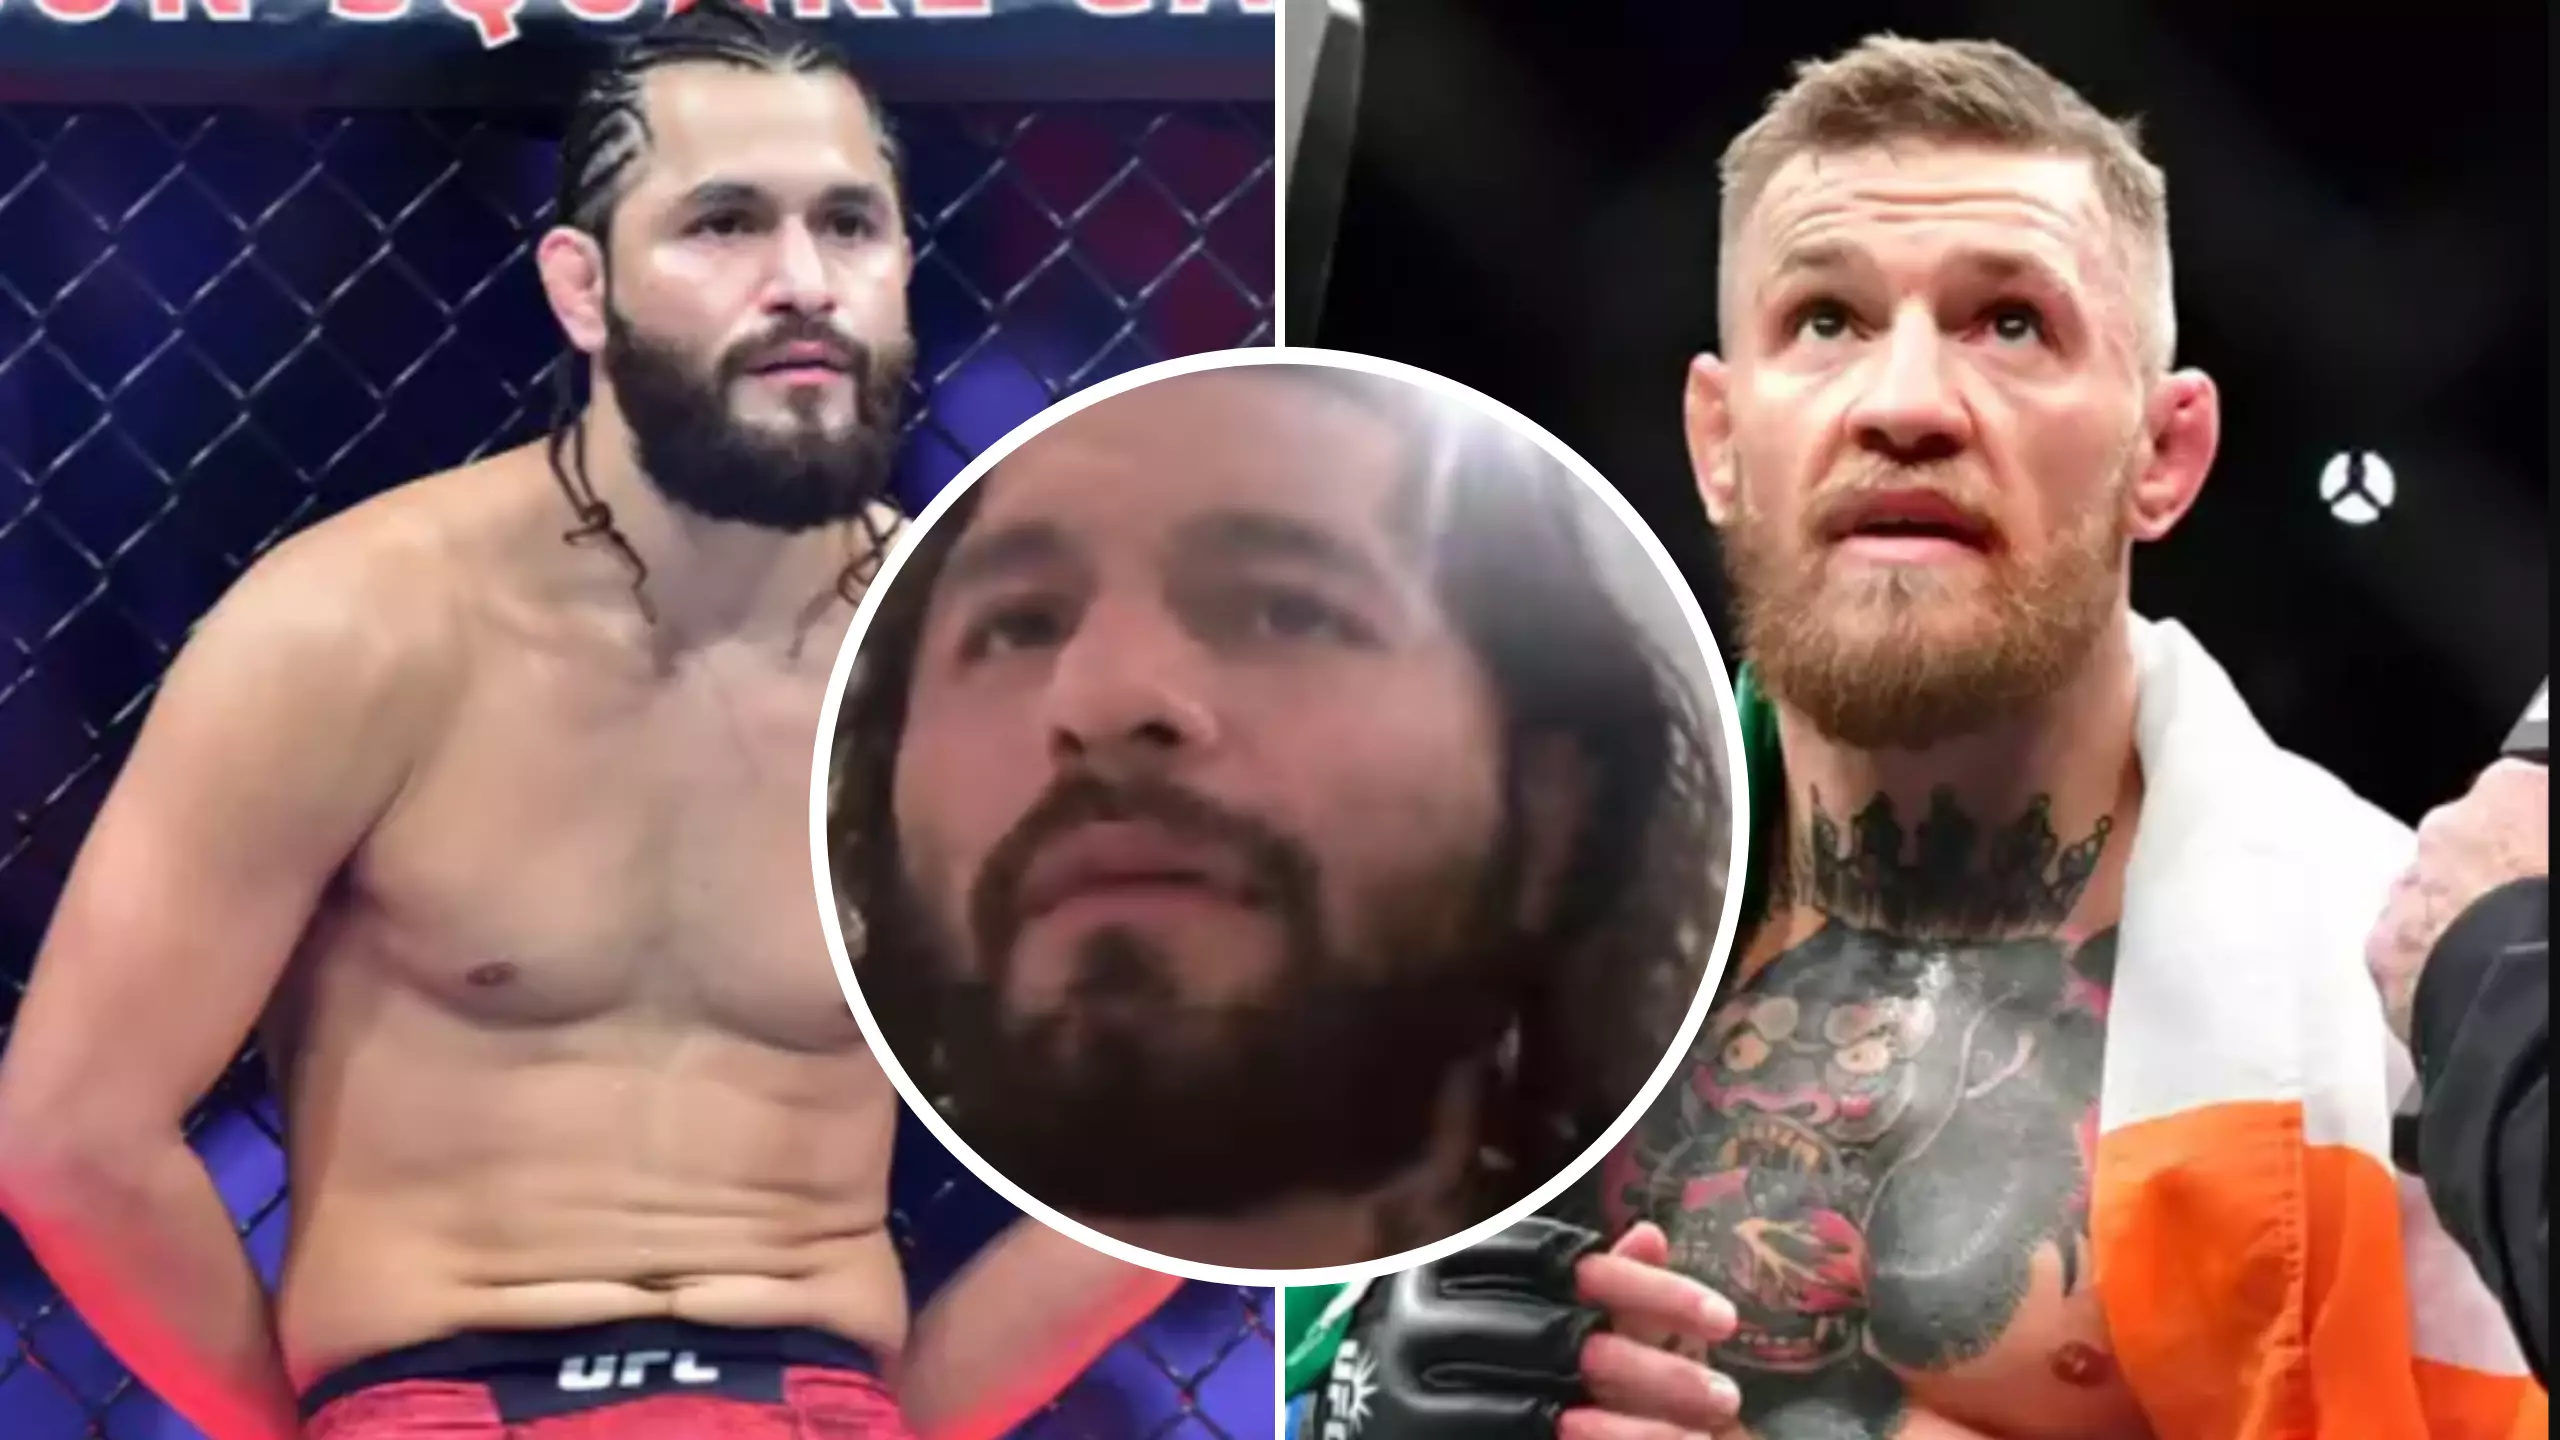 Jorge Masvidal Reveals He Wants To Fight Conor McGregor, Promises Violence